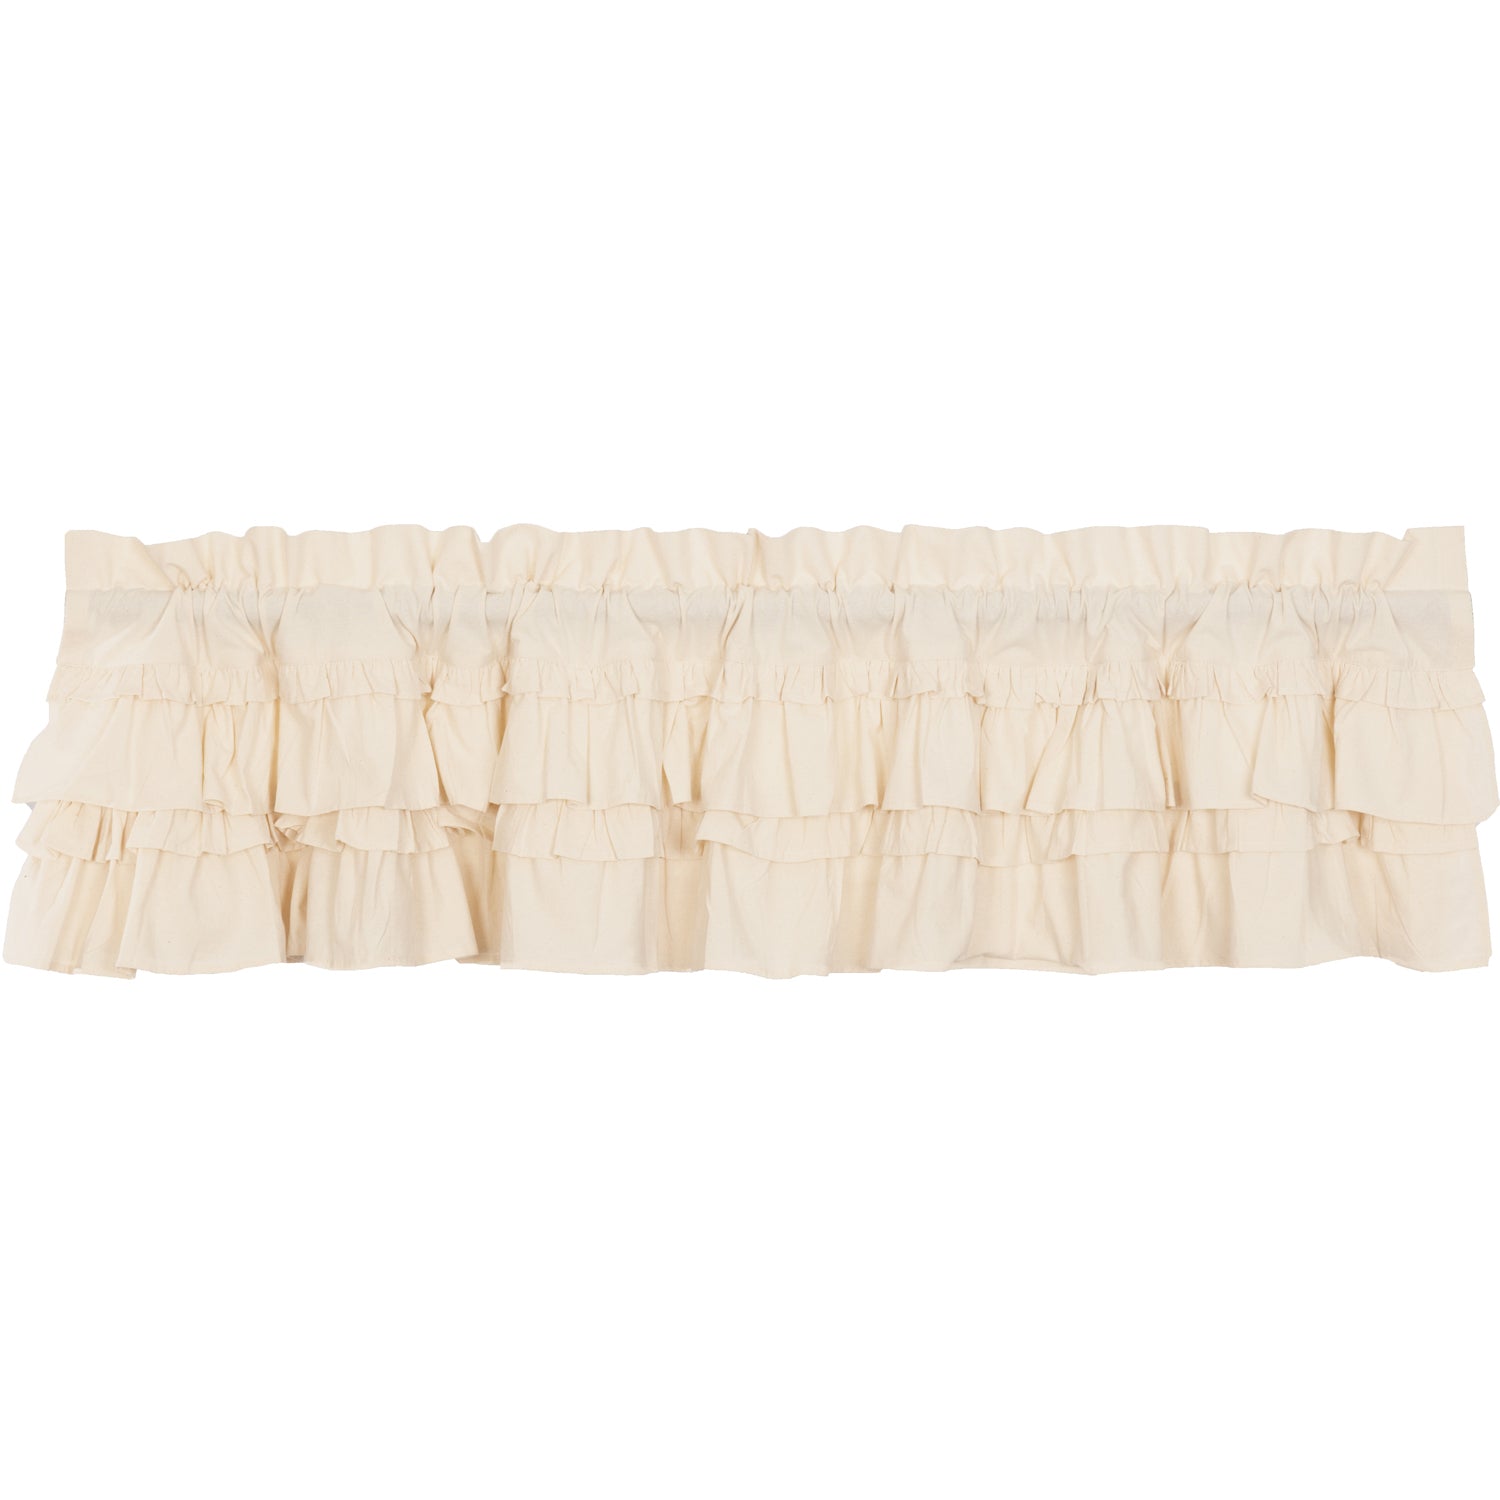 51992-Muslin-Ruffled-Unbleached-Natural-Valance-16x72-image-6